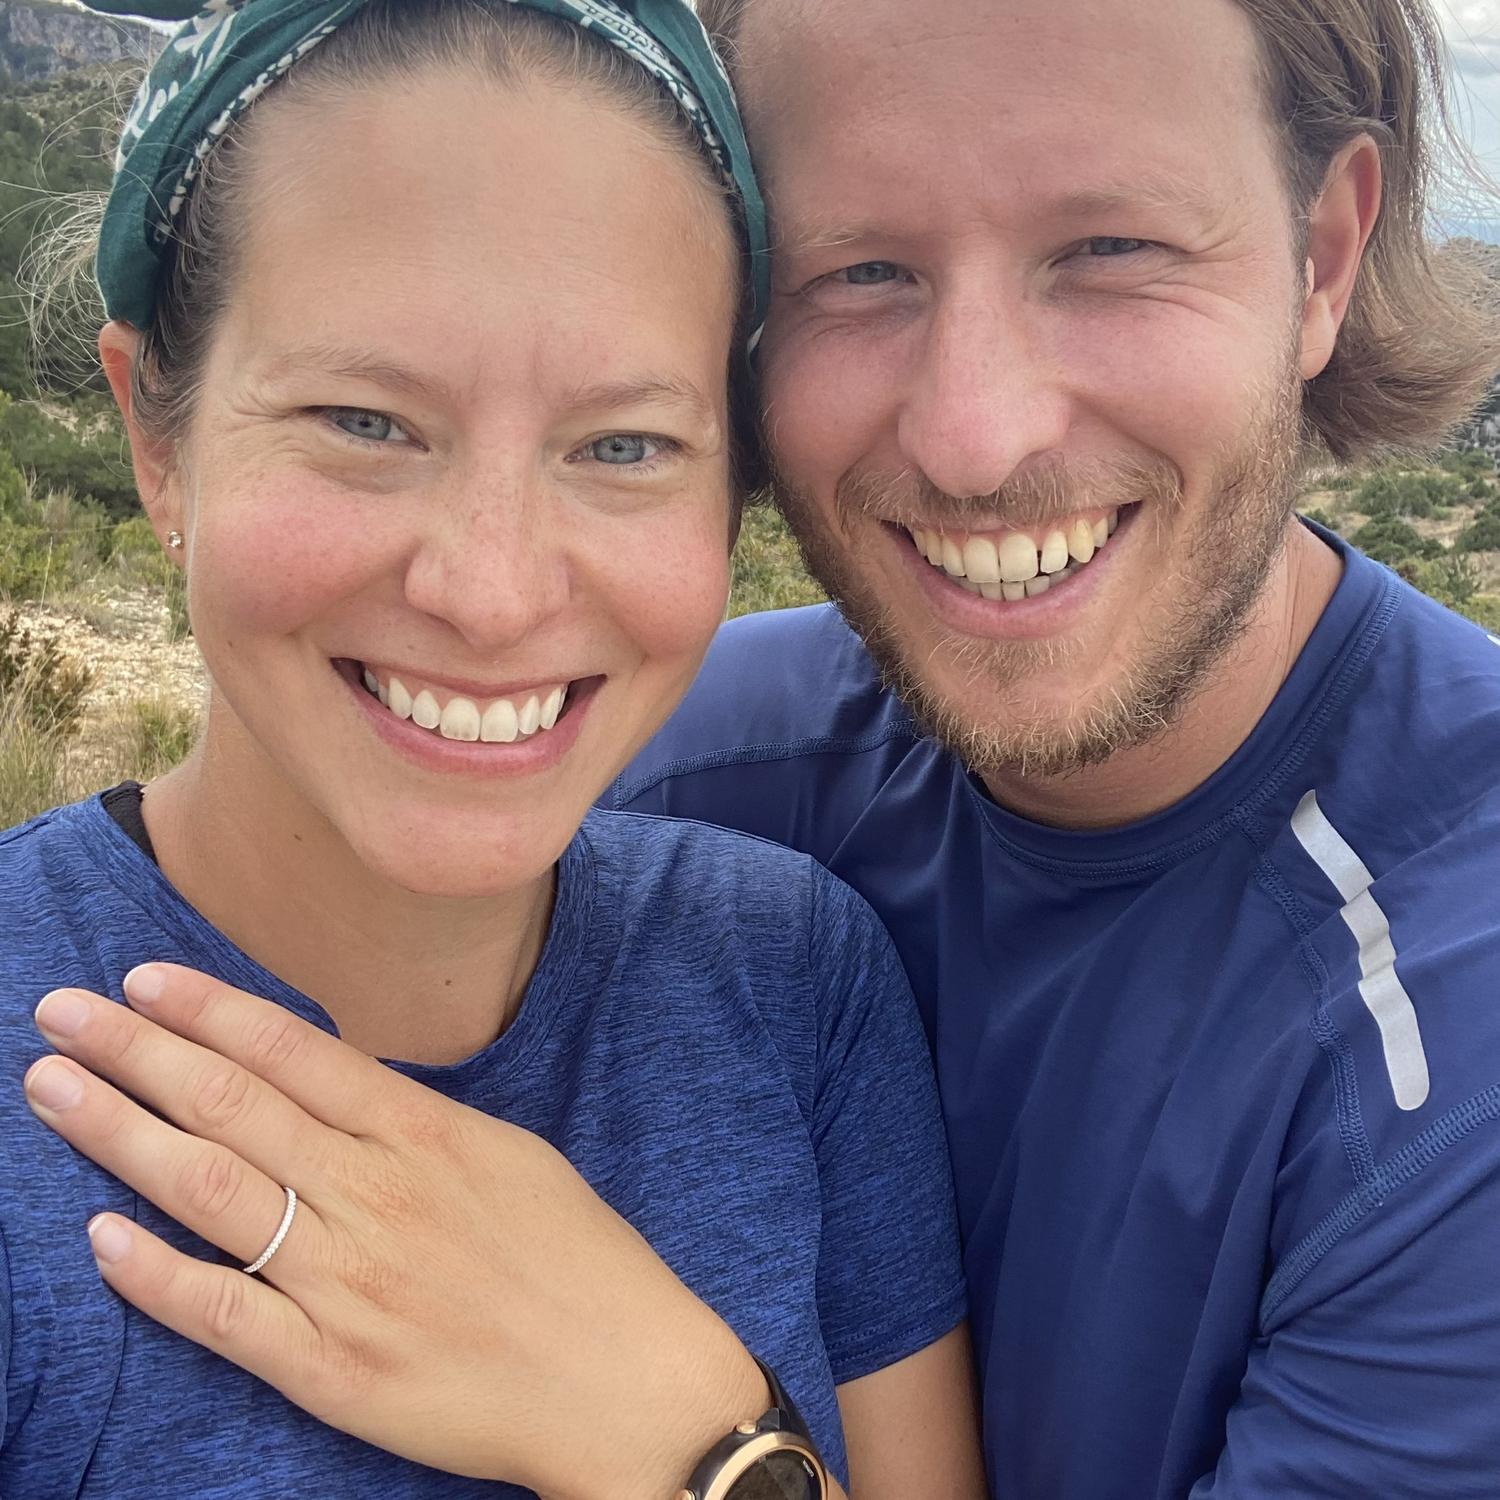 8/31/2022 - We're engaged! Hike around Verdon Gorge in Moustiers-Sainte-Marie